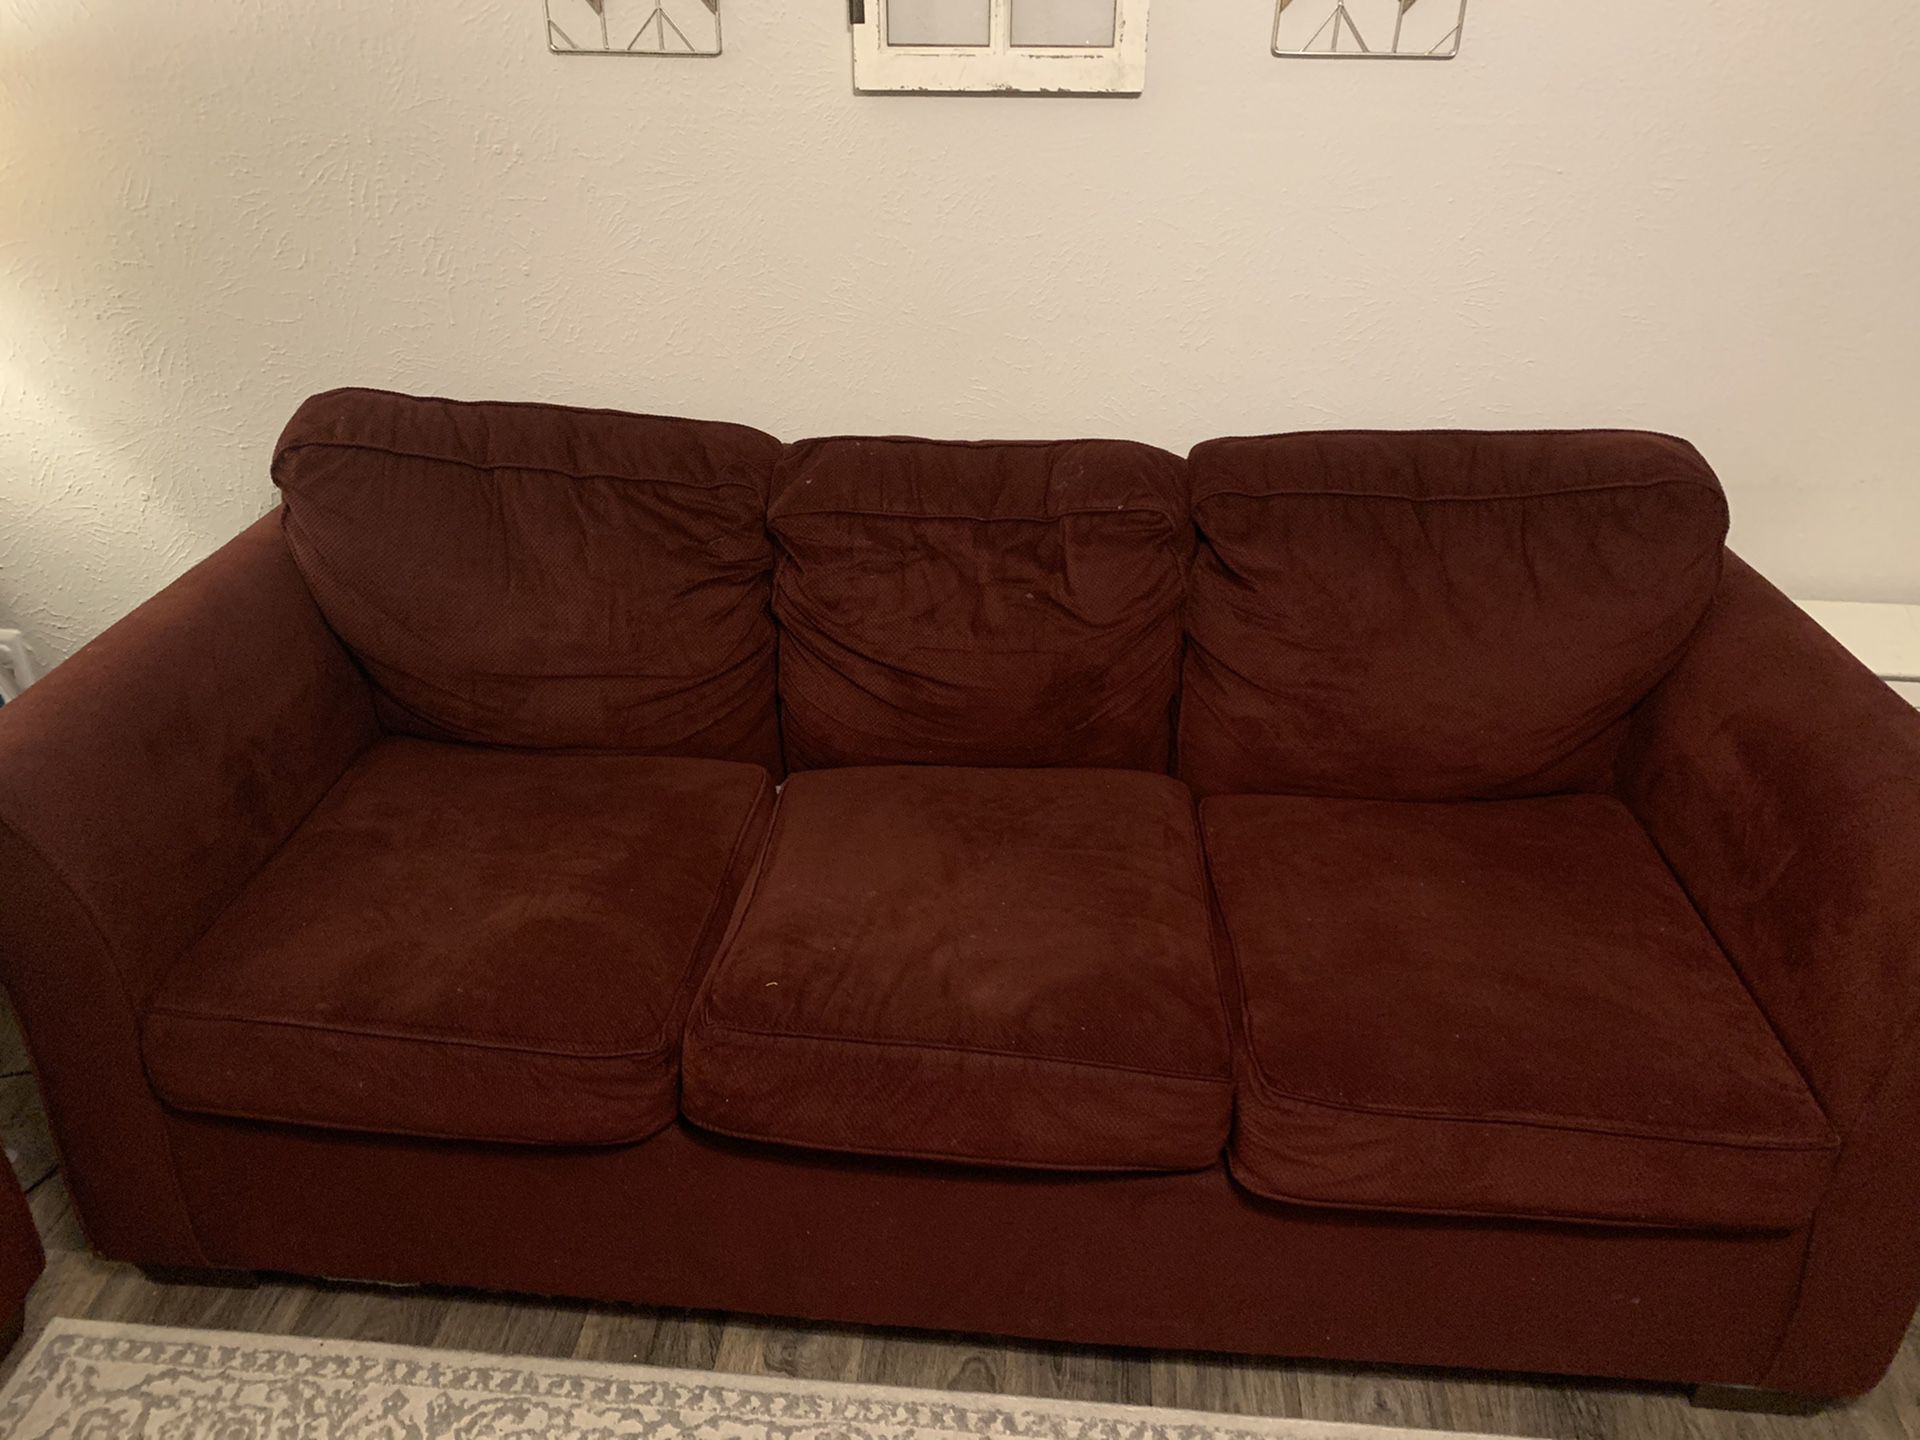 Red/Maroon couches